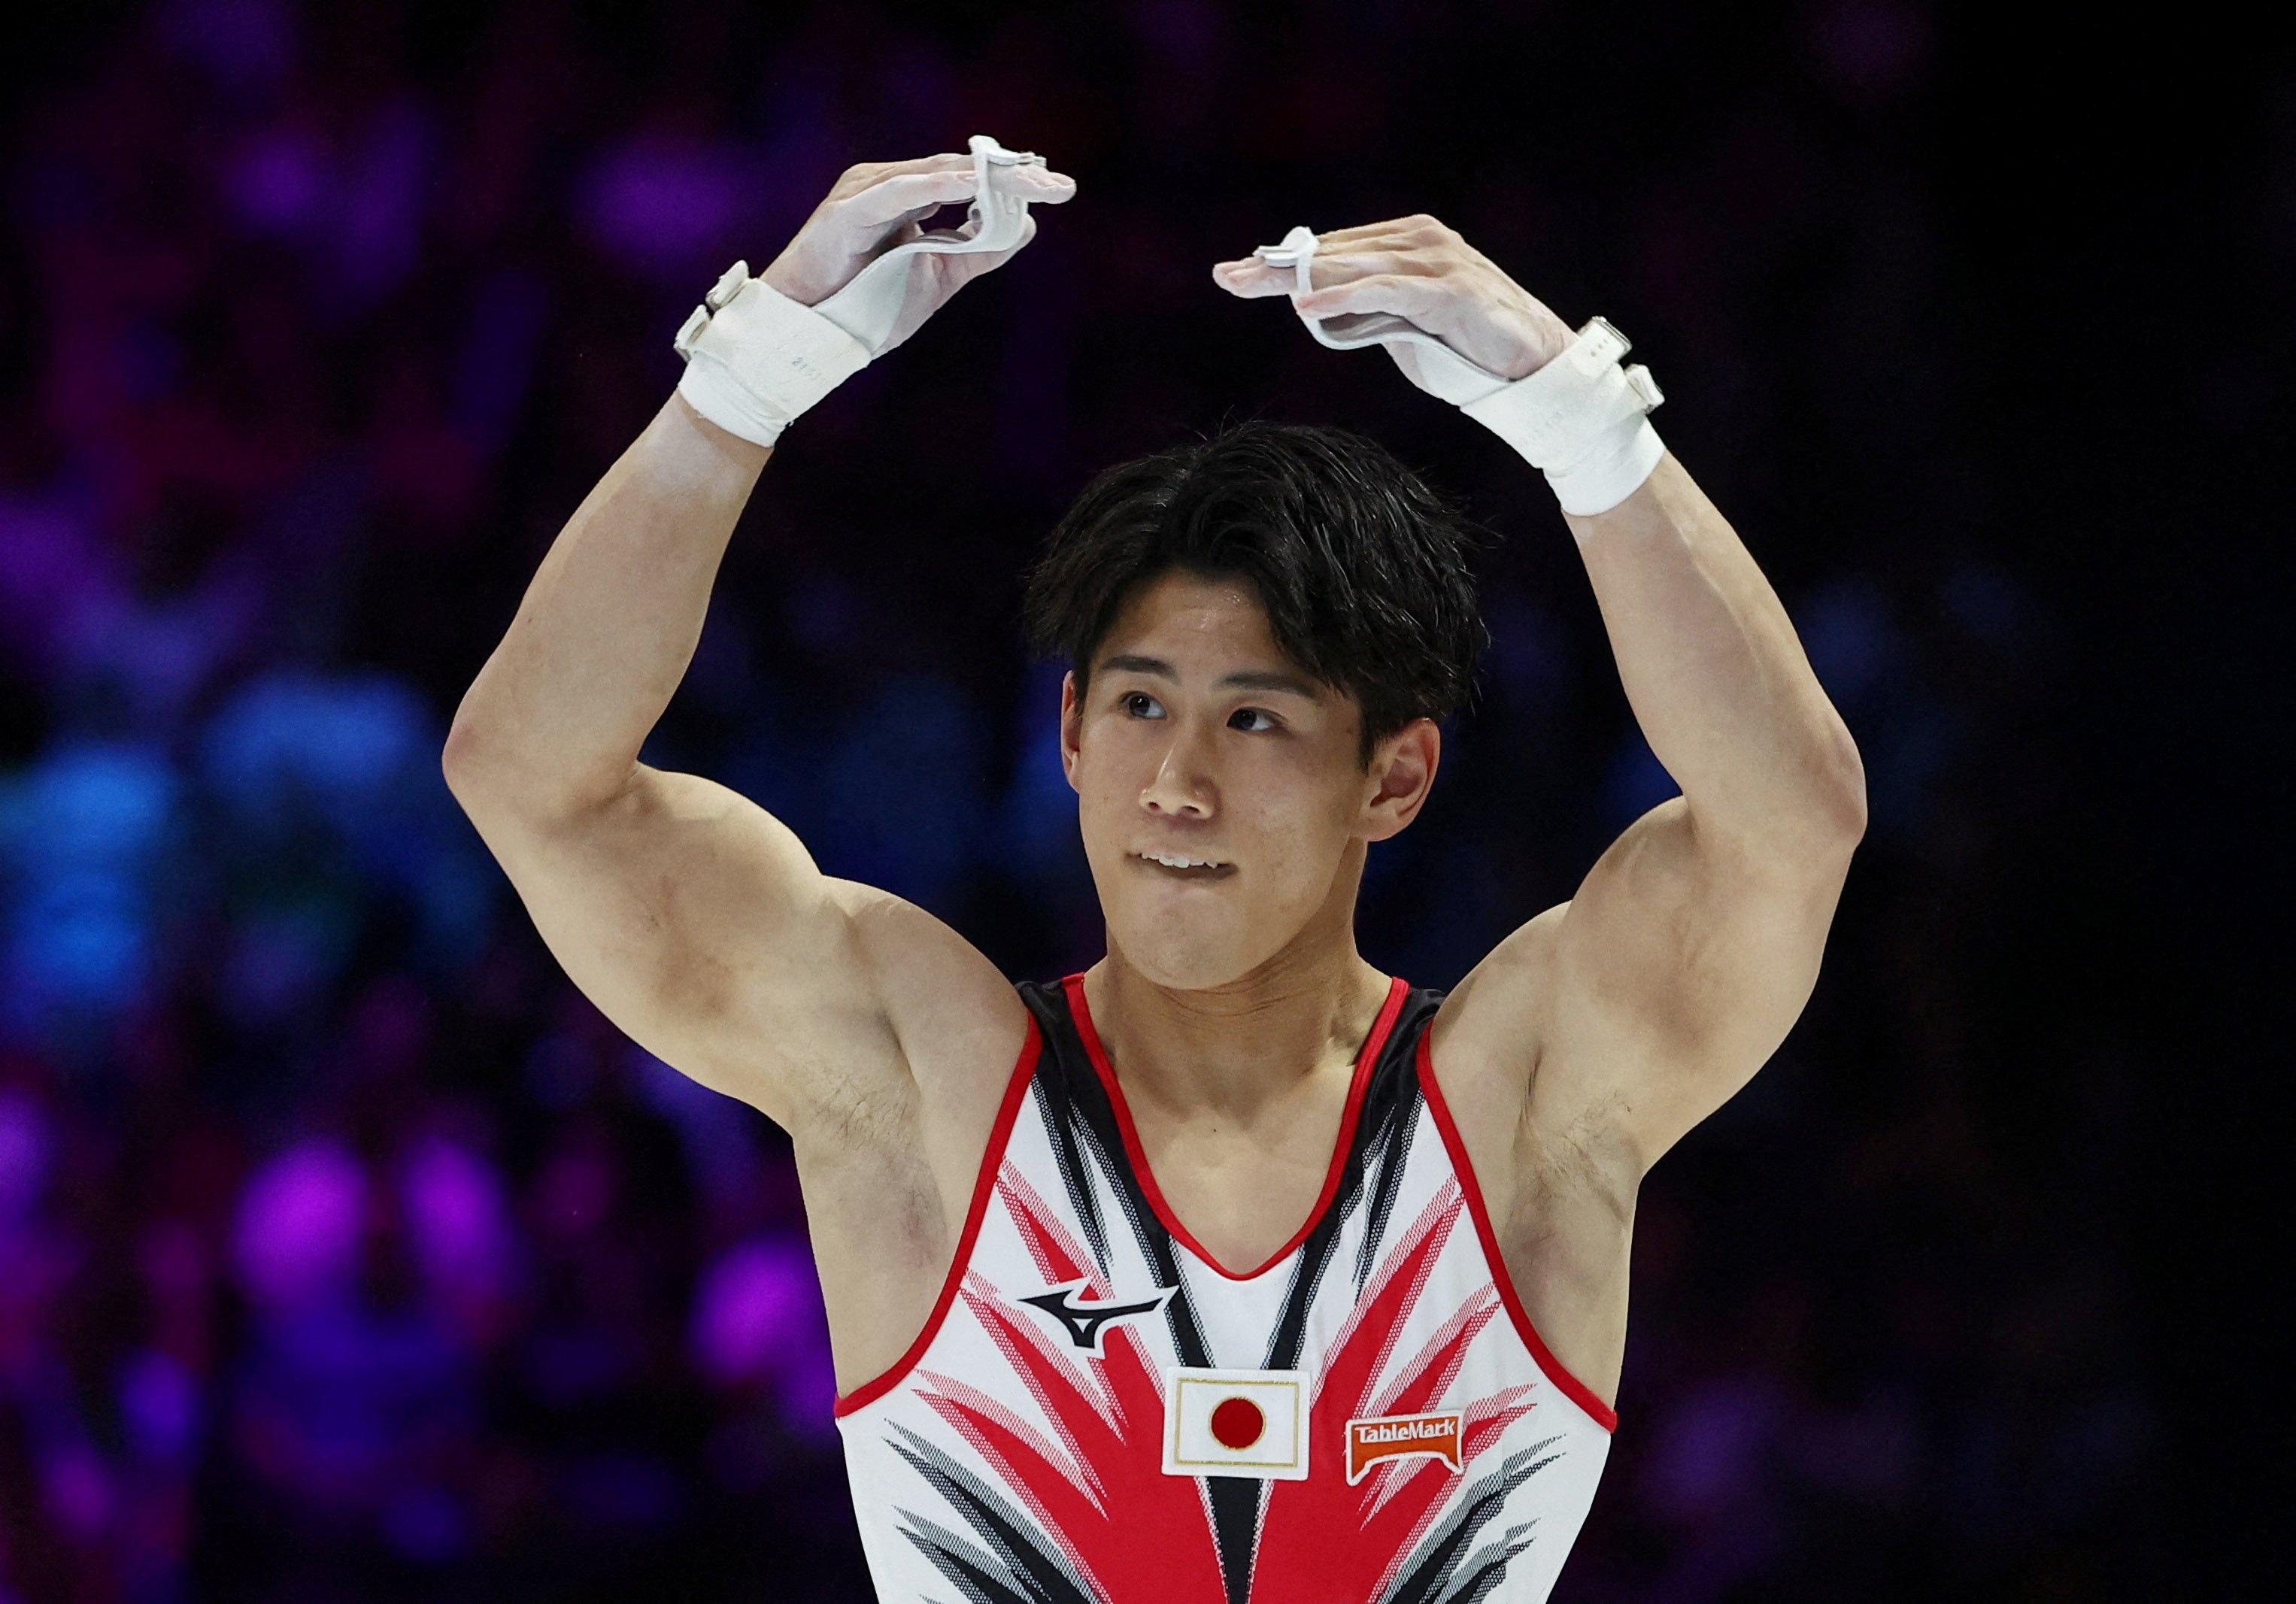 Led by Daiki Hashimoto, Japan defeated China to win the World Championships title last October and will hope to beat their rivals again in Paris. Photo: Reuters